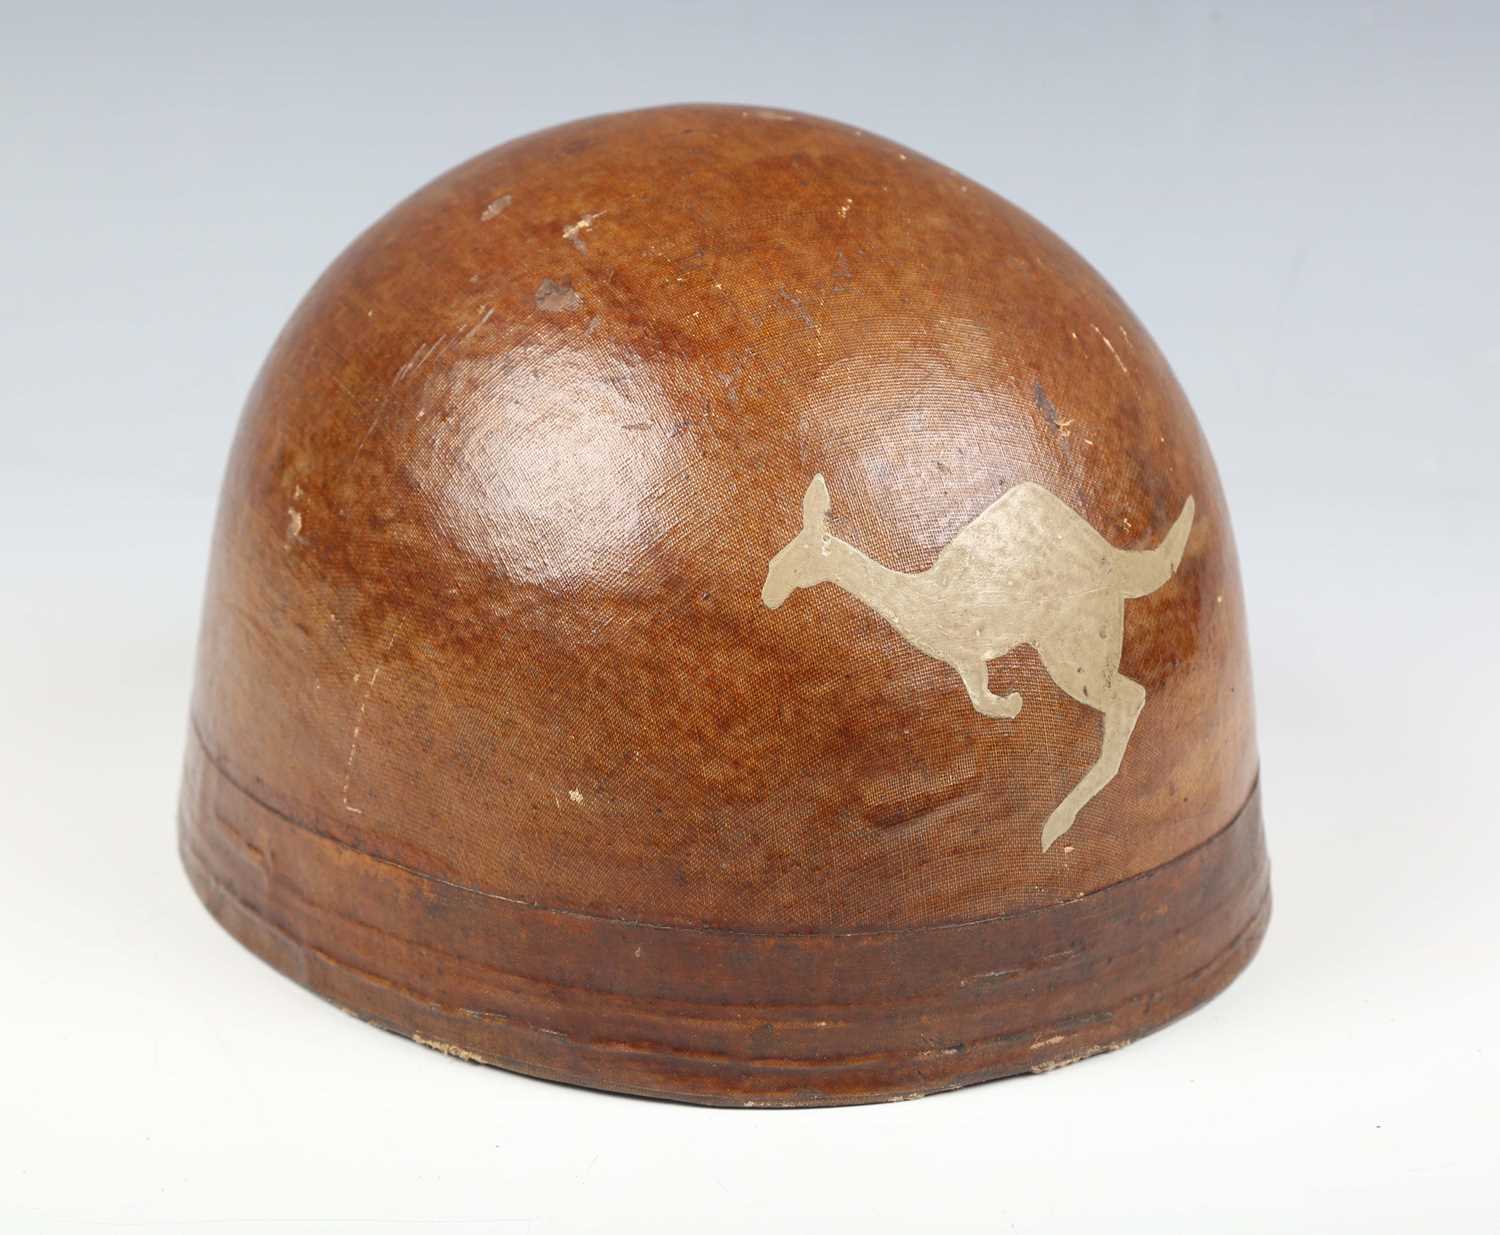 A rare Second World War period despatch rider's helmet, probably Australian, with fabric-covered